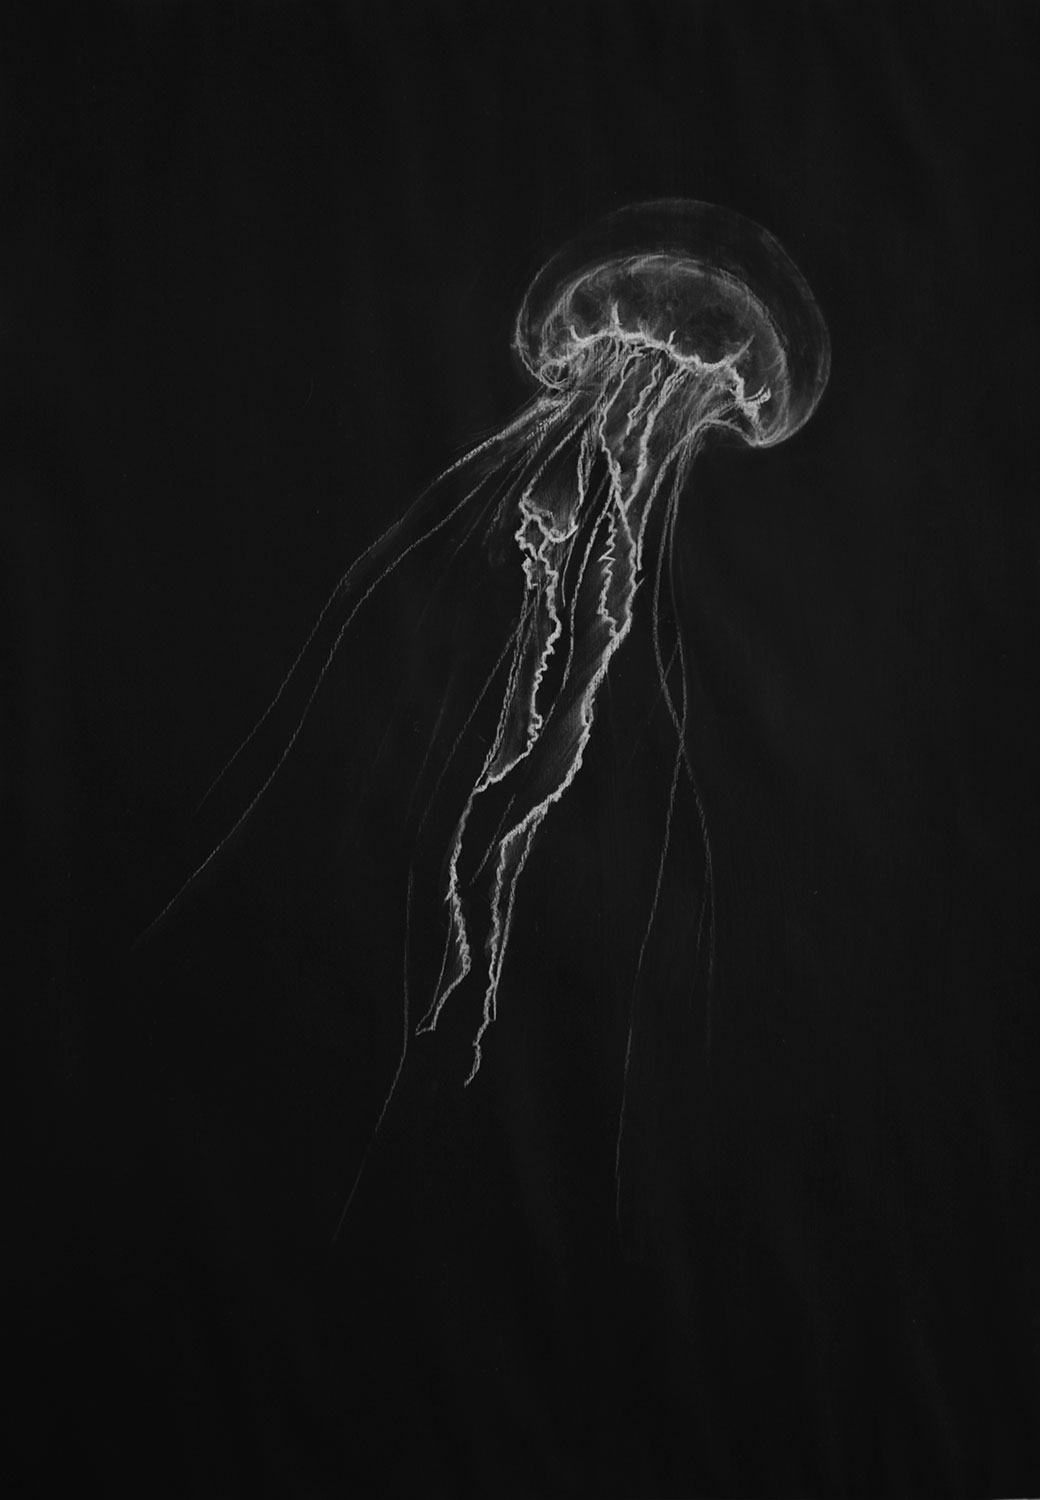 jelly fishes - Wolfgang Stiller